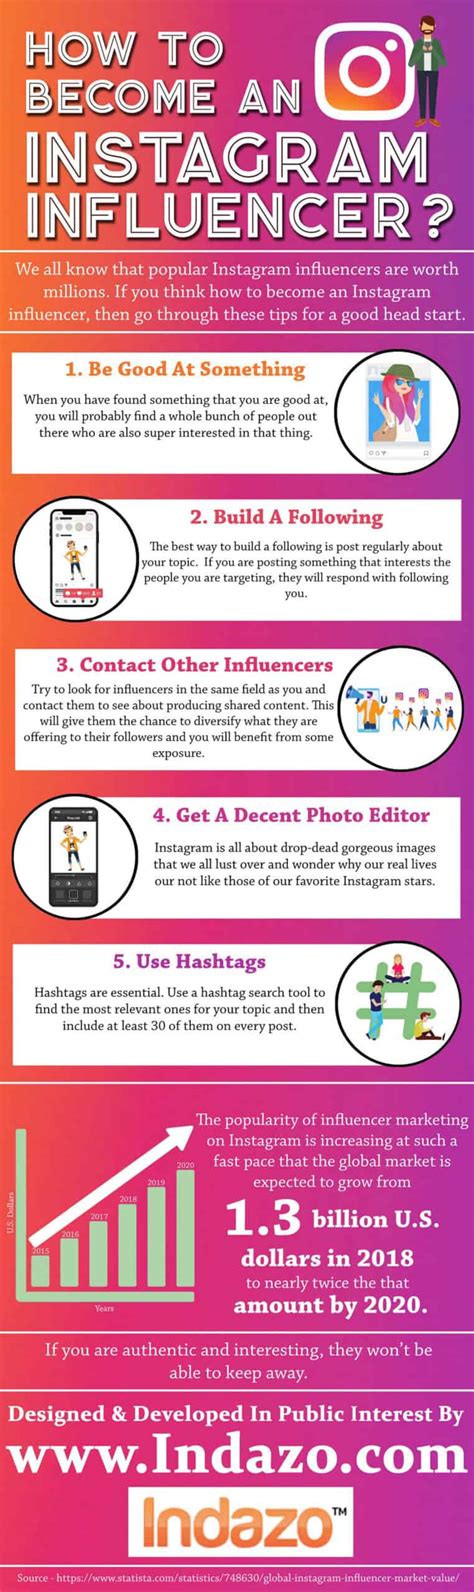 How to become an instagram influencer. To become an influencer, all you really need to do is join up with with the various social medias. You can join them all, or you can focus on one of them. ... However, you can purchase followers for Instagram, TikTok, Twitter, and YouTube. It's only about $100 - $200 to purchase 5,000 followers for each service, so it's easy to get that money ... 